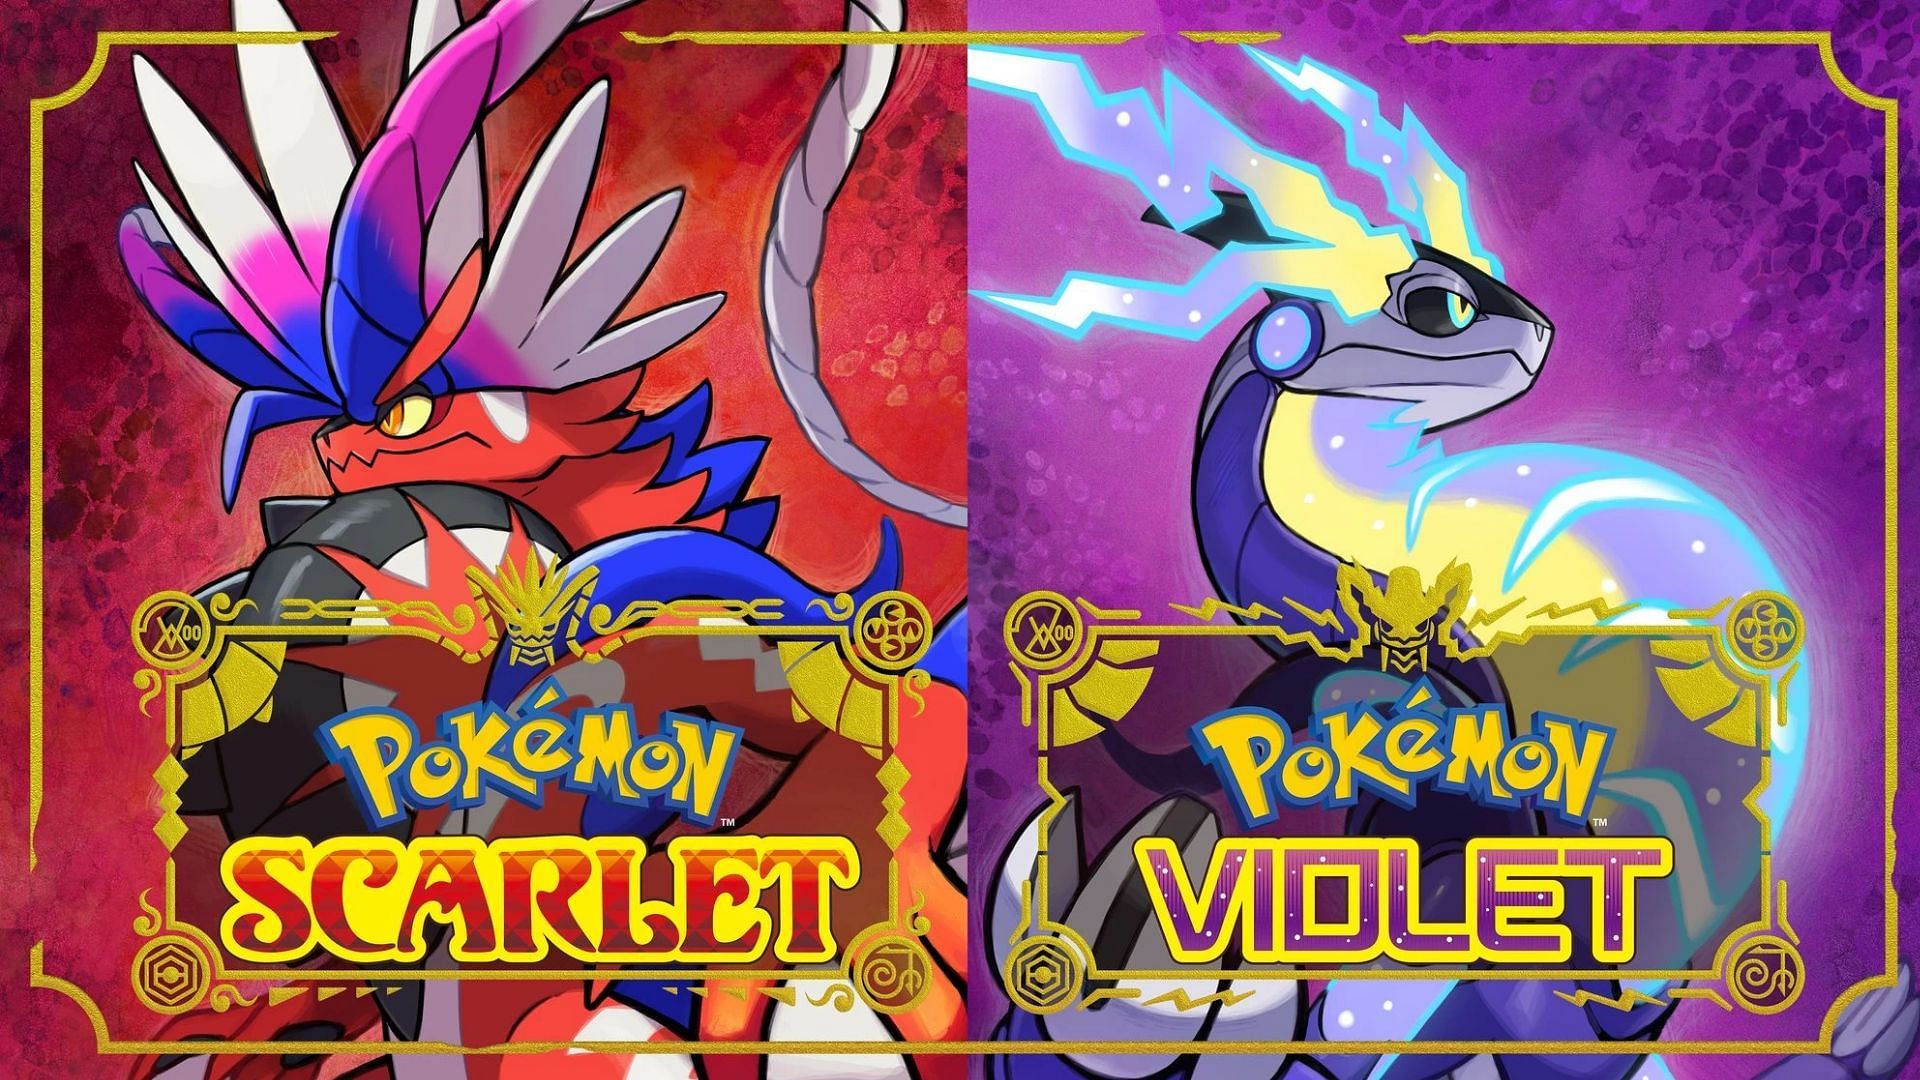 The two main Legendaries are among the forbidden Pokemon that cannot be used in Scarlet and Violet's Ranked Battles (Image via Game Freak)